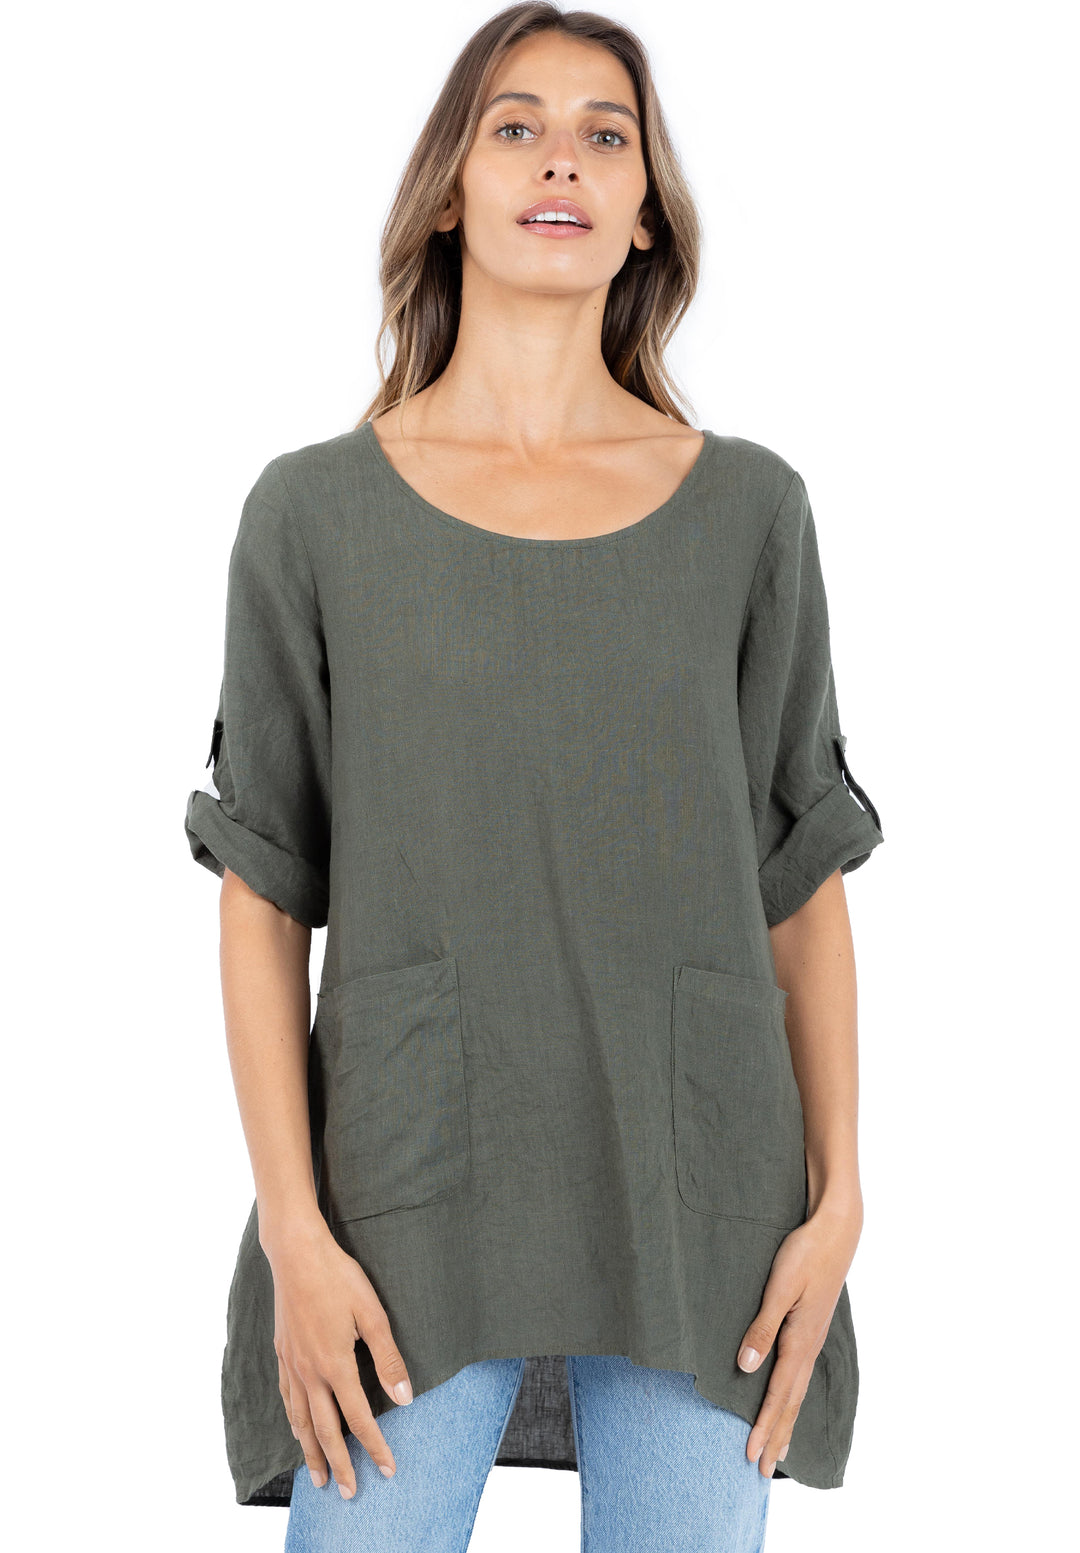 Federica Olive Green, Sand Washed Linen Tunic Top